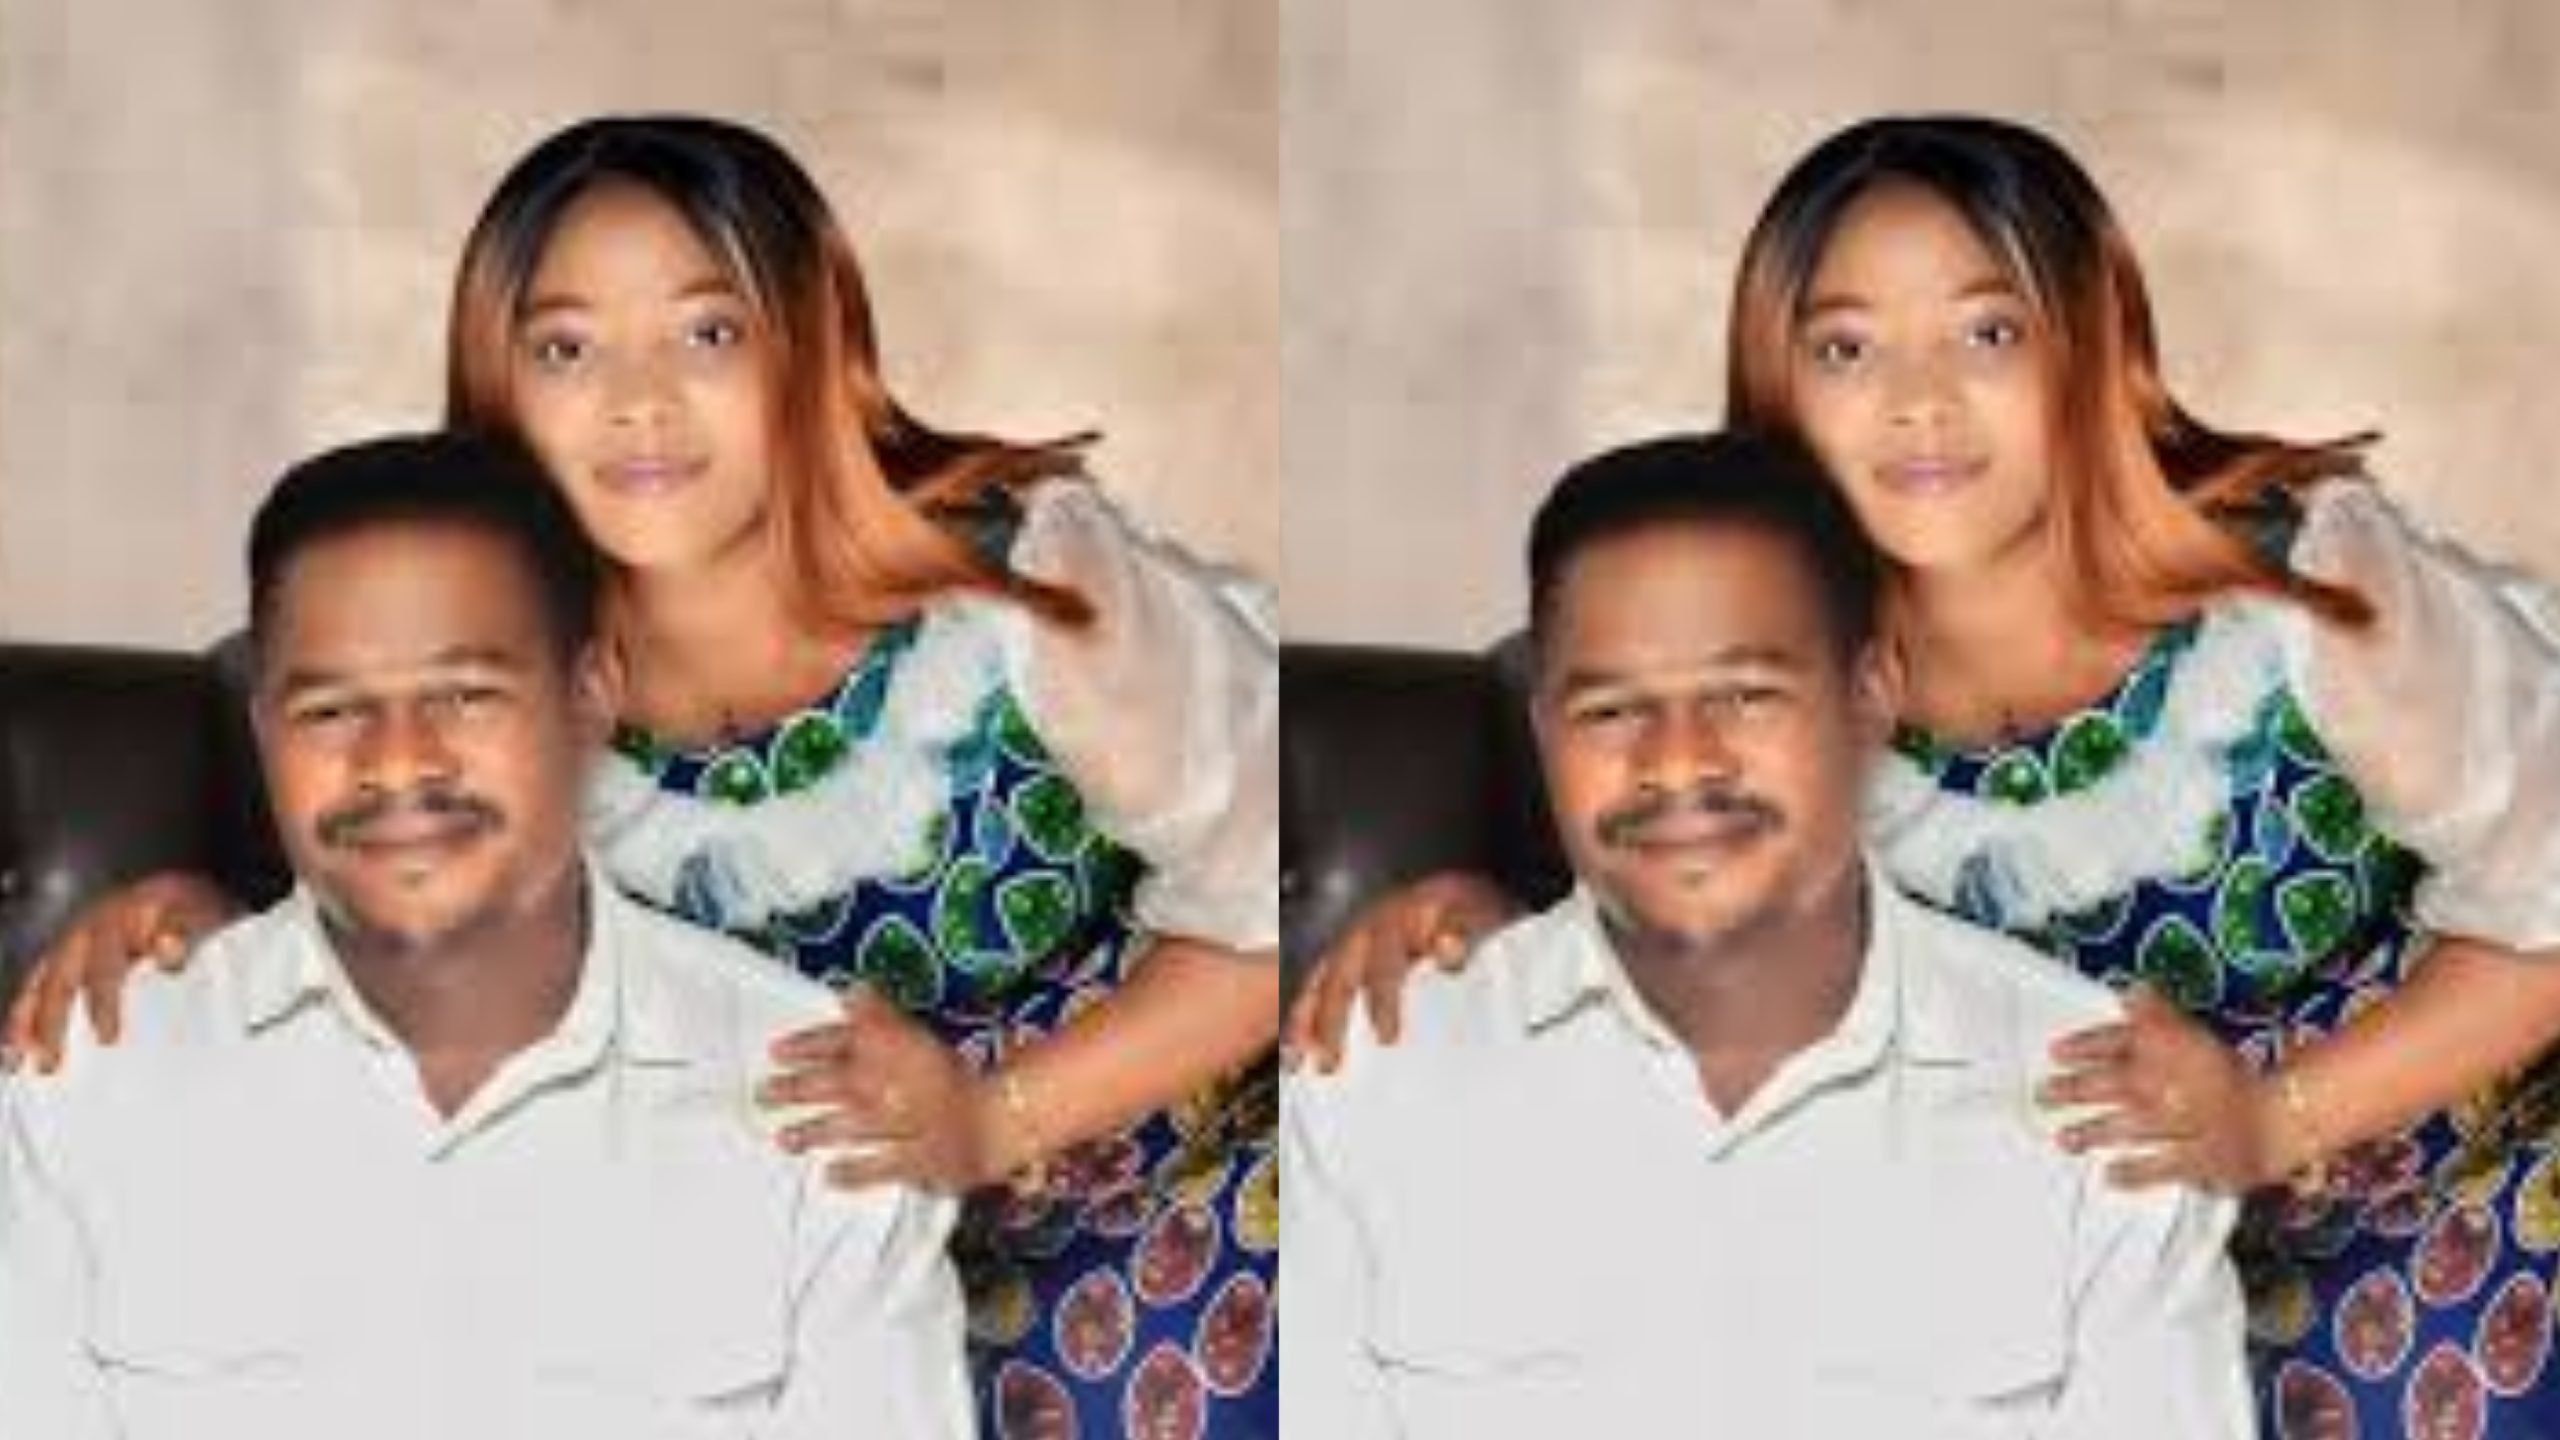 "I used to write her name in list of noise makers just to provoke her" - Man goes down memory lane, celebrates wedding anniversary with classmate